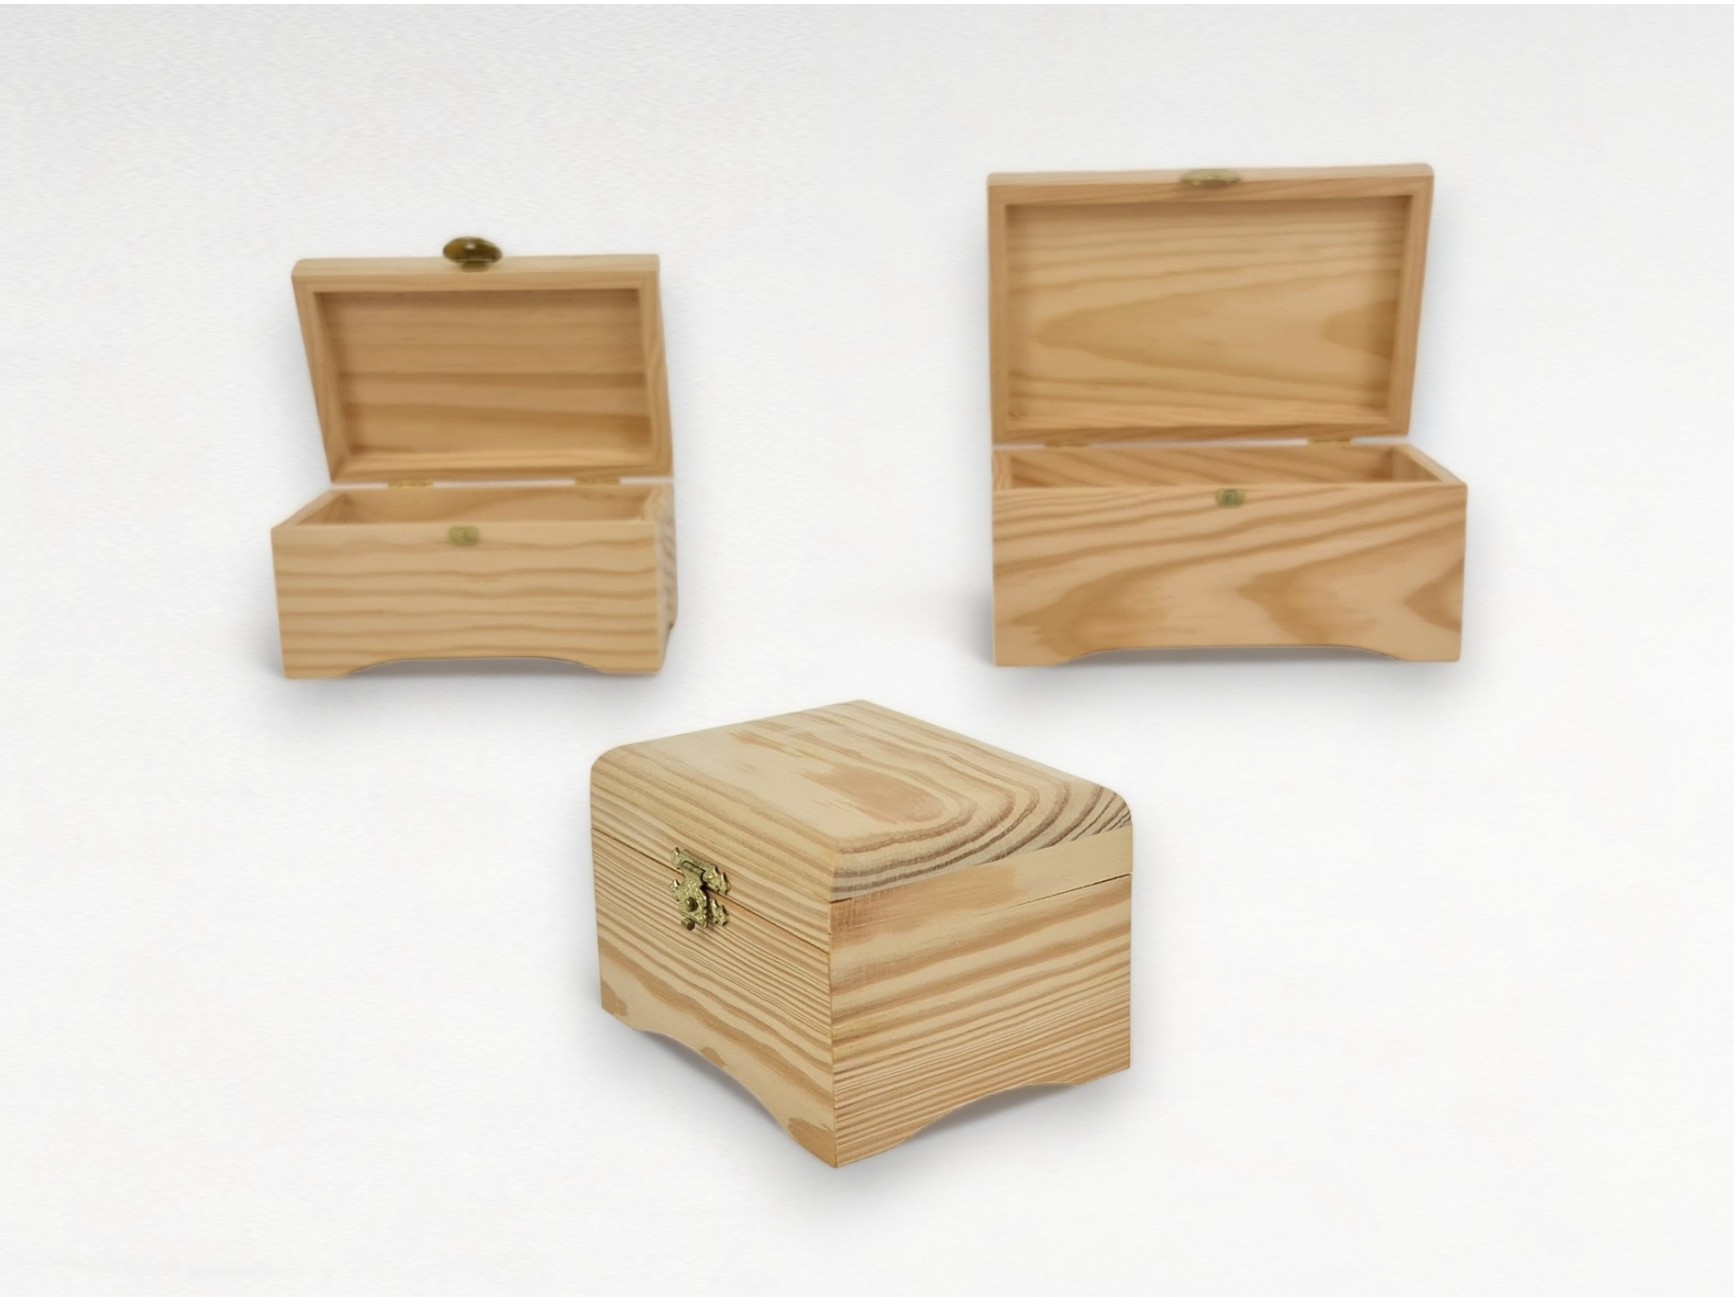 Cubos de madera natural 7x7 cm. Ref.W295 - Mabaonline